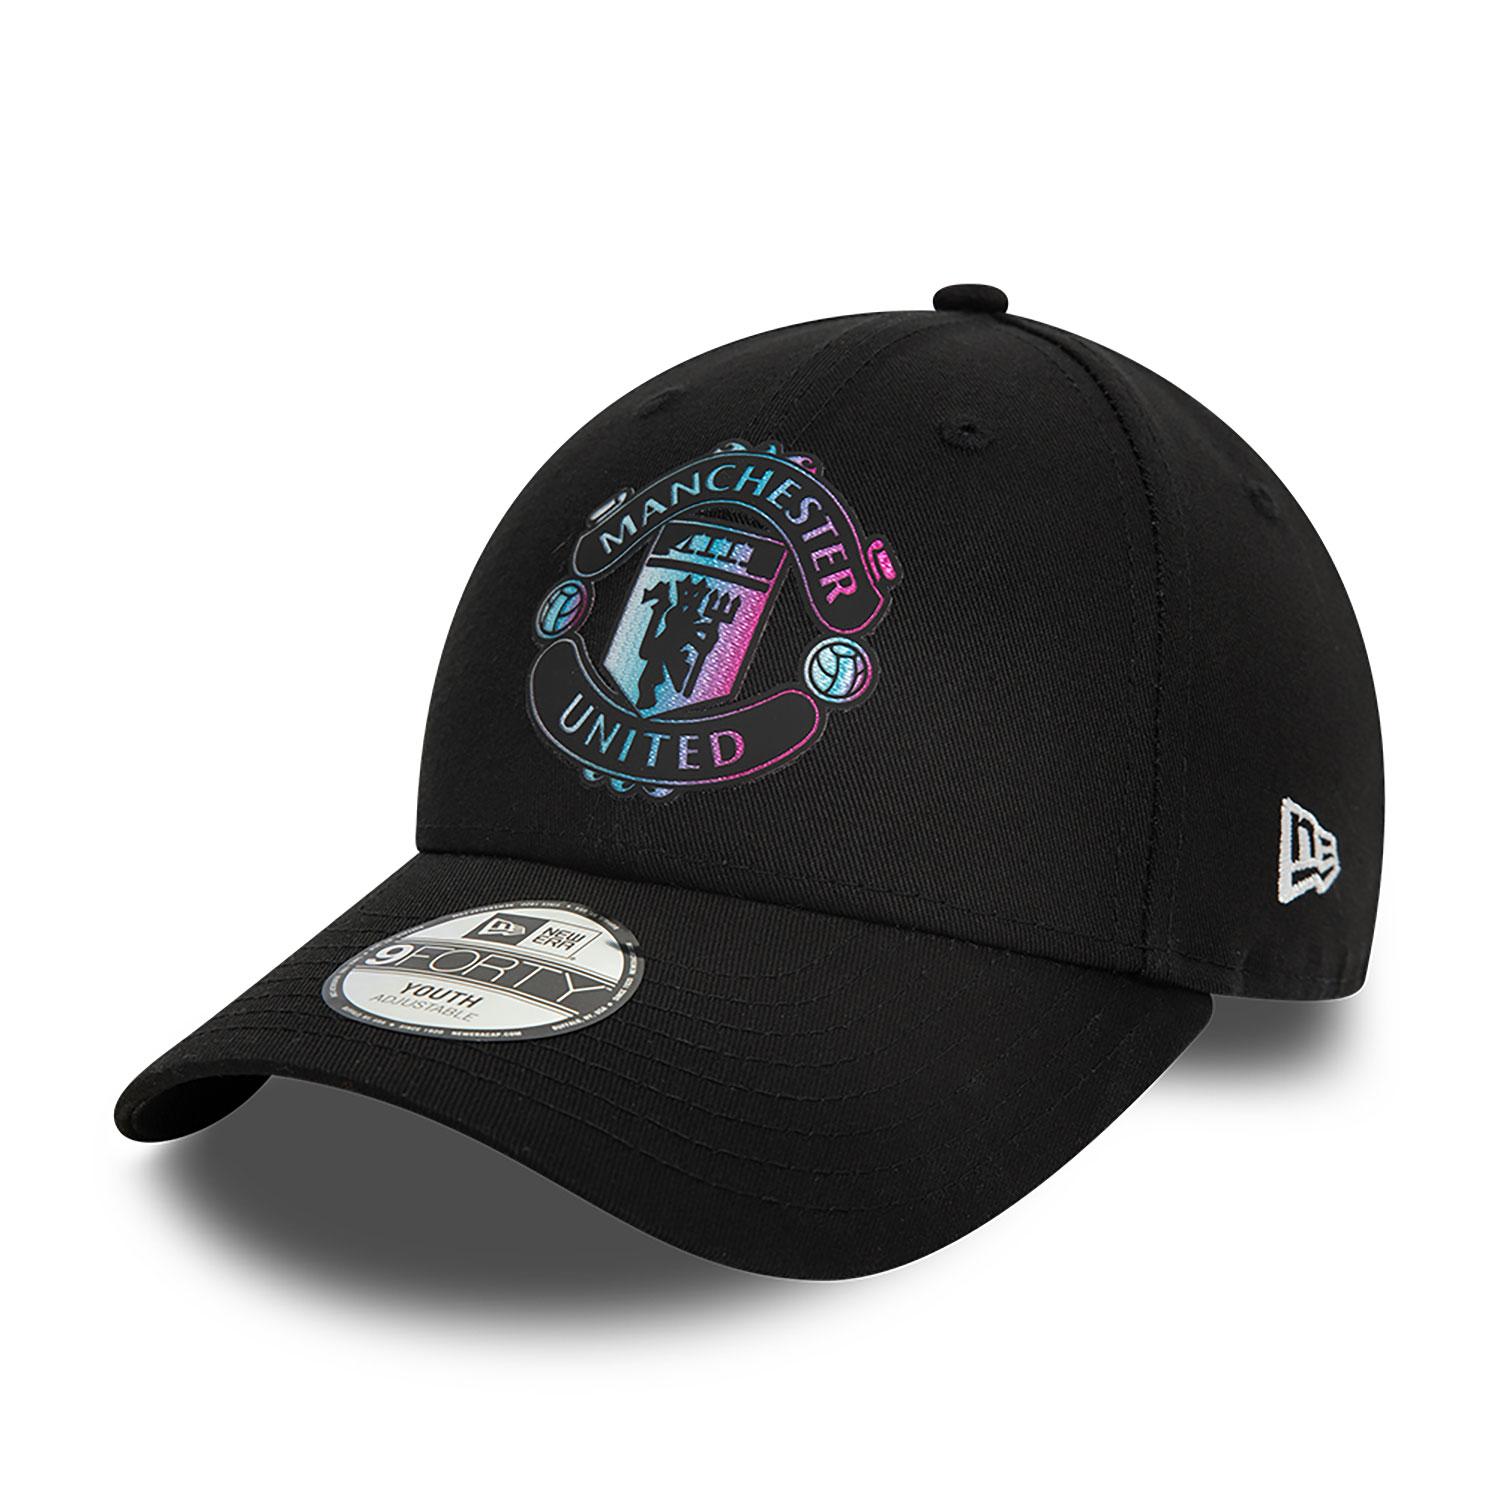 Manchester United FC Youth Holographic Black 9FORTY Adjustable Cap